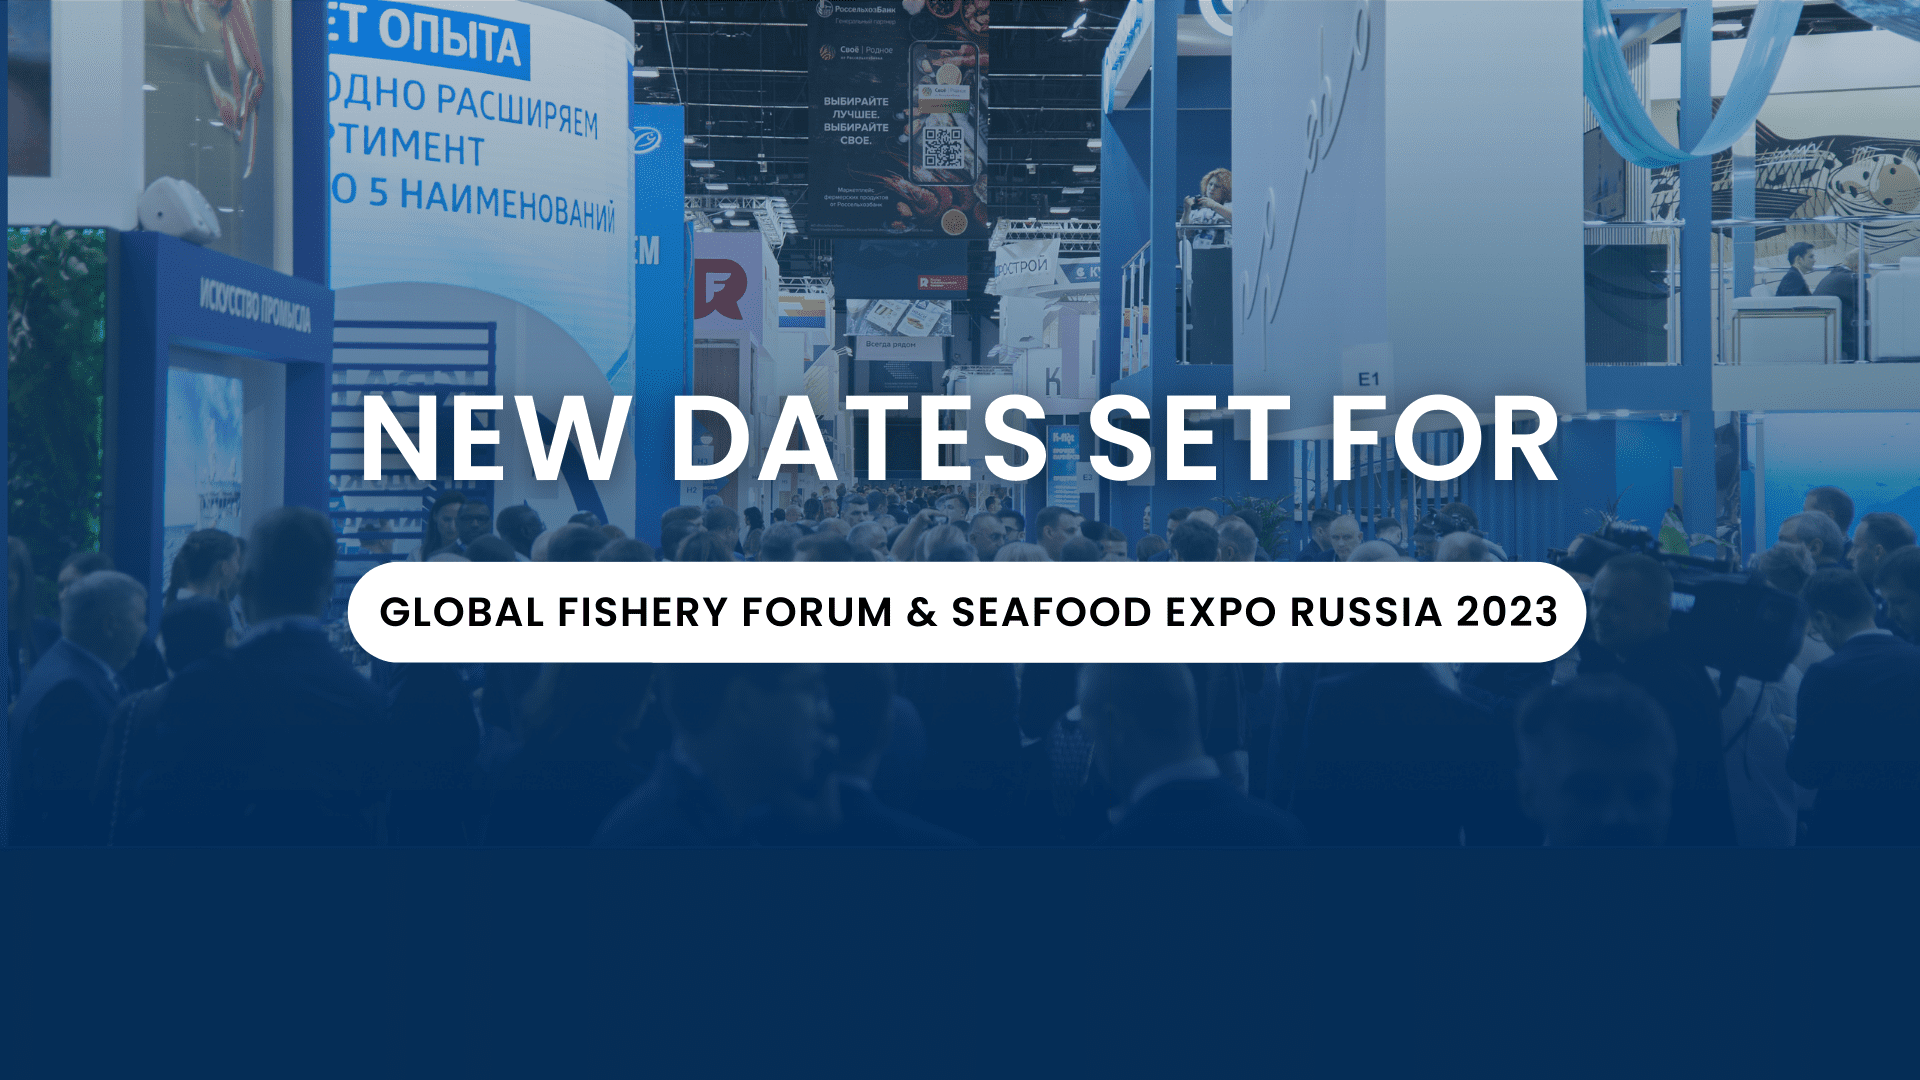 New Dates Set for Global Fishery Forum & Seafood Expo Russia 2023